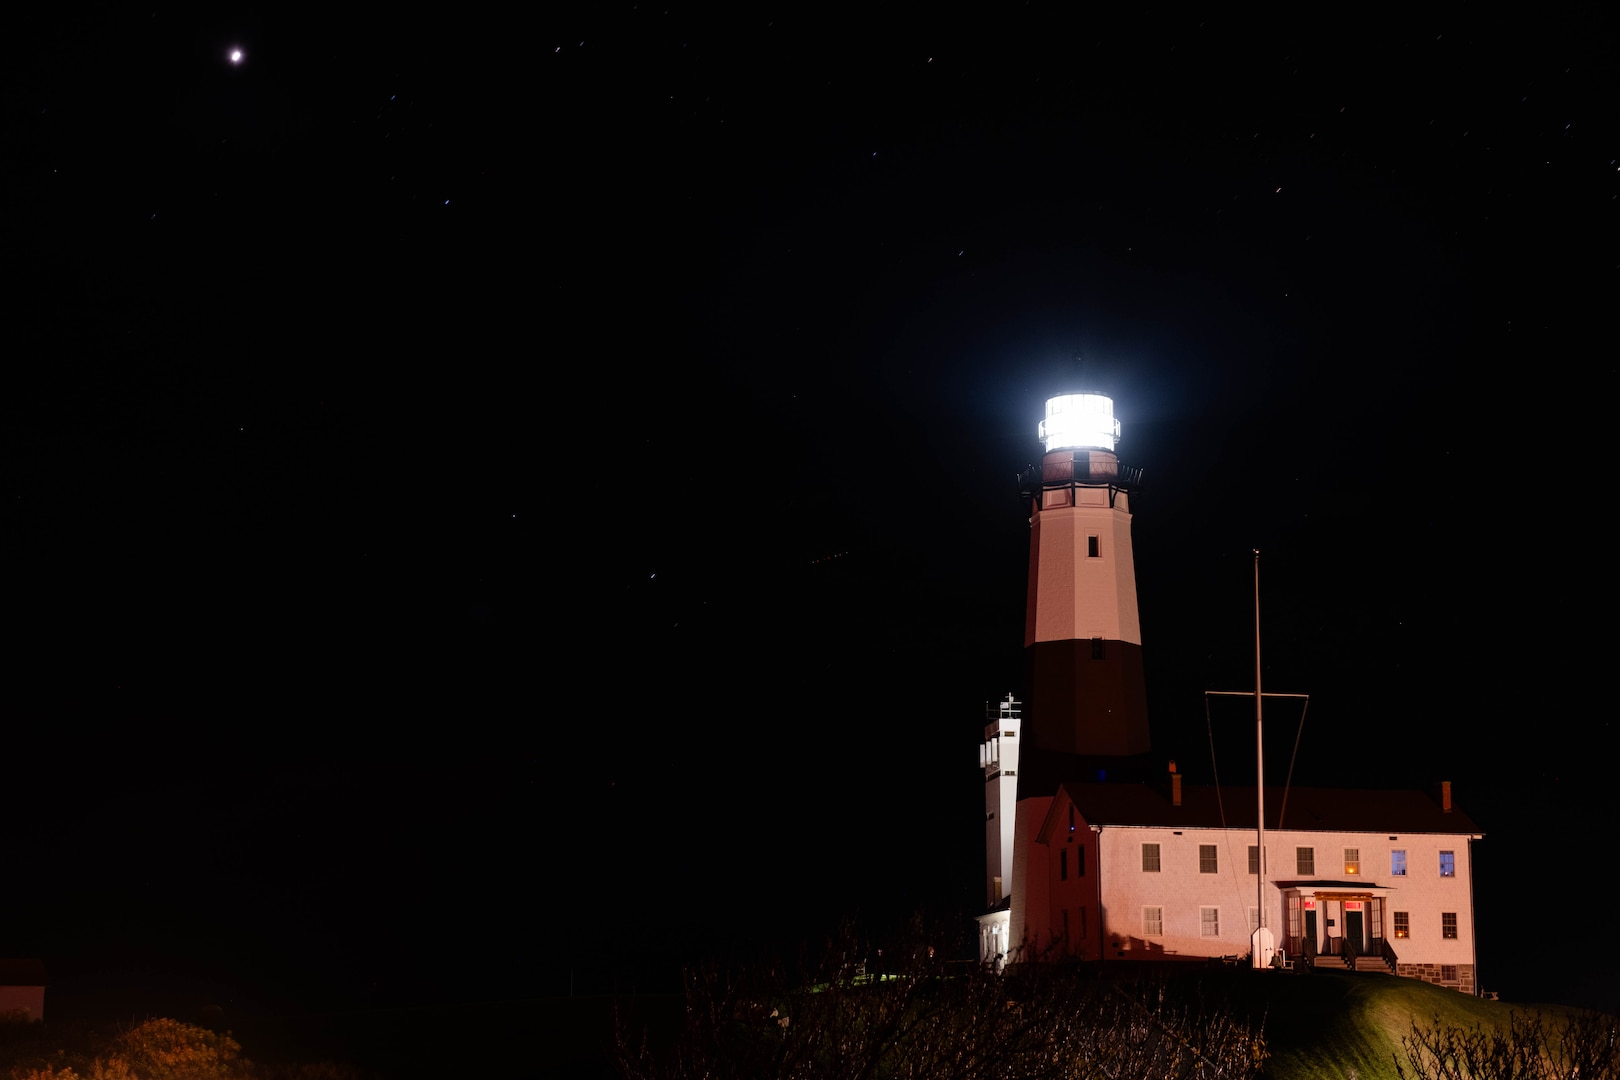 The Montauk Lighthouse located at the northern tip of Long Island, New York. The lighthouse was commissioned by President George Washington in 1792. (Photo courtesy of the Montauk Historical Society)